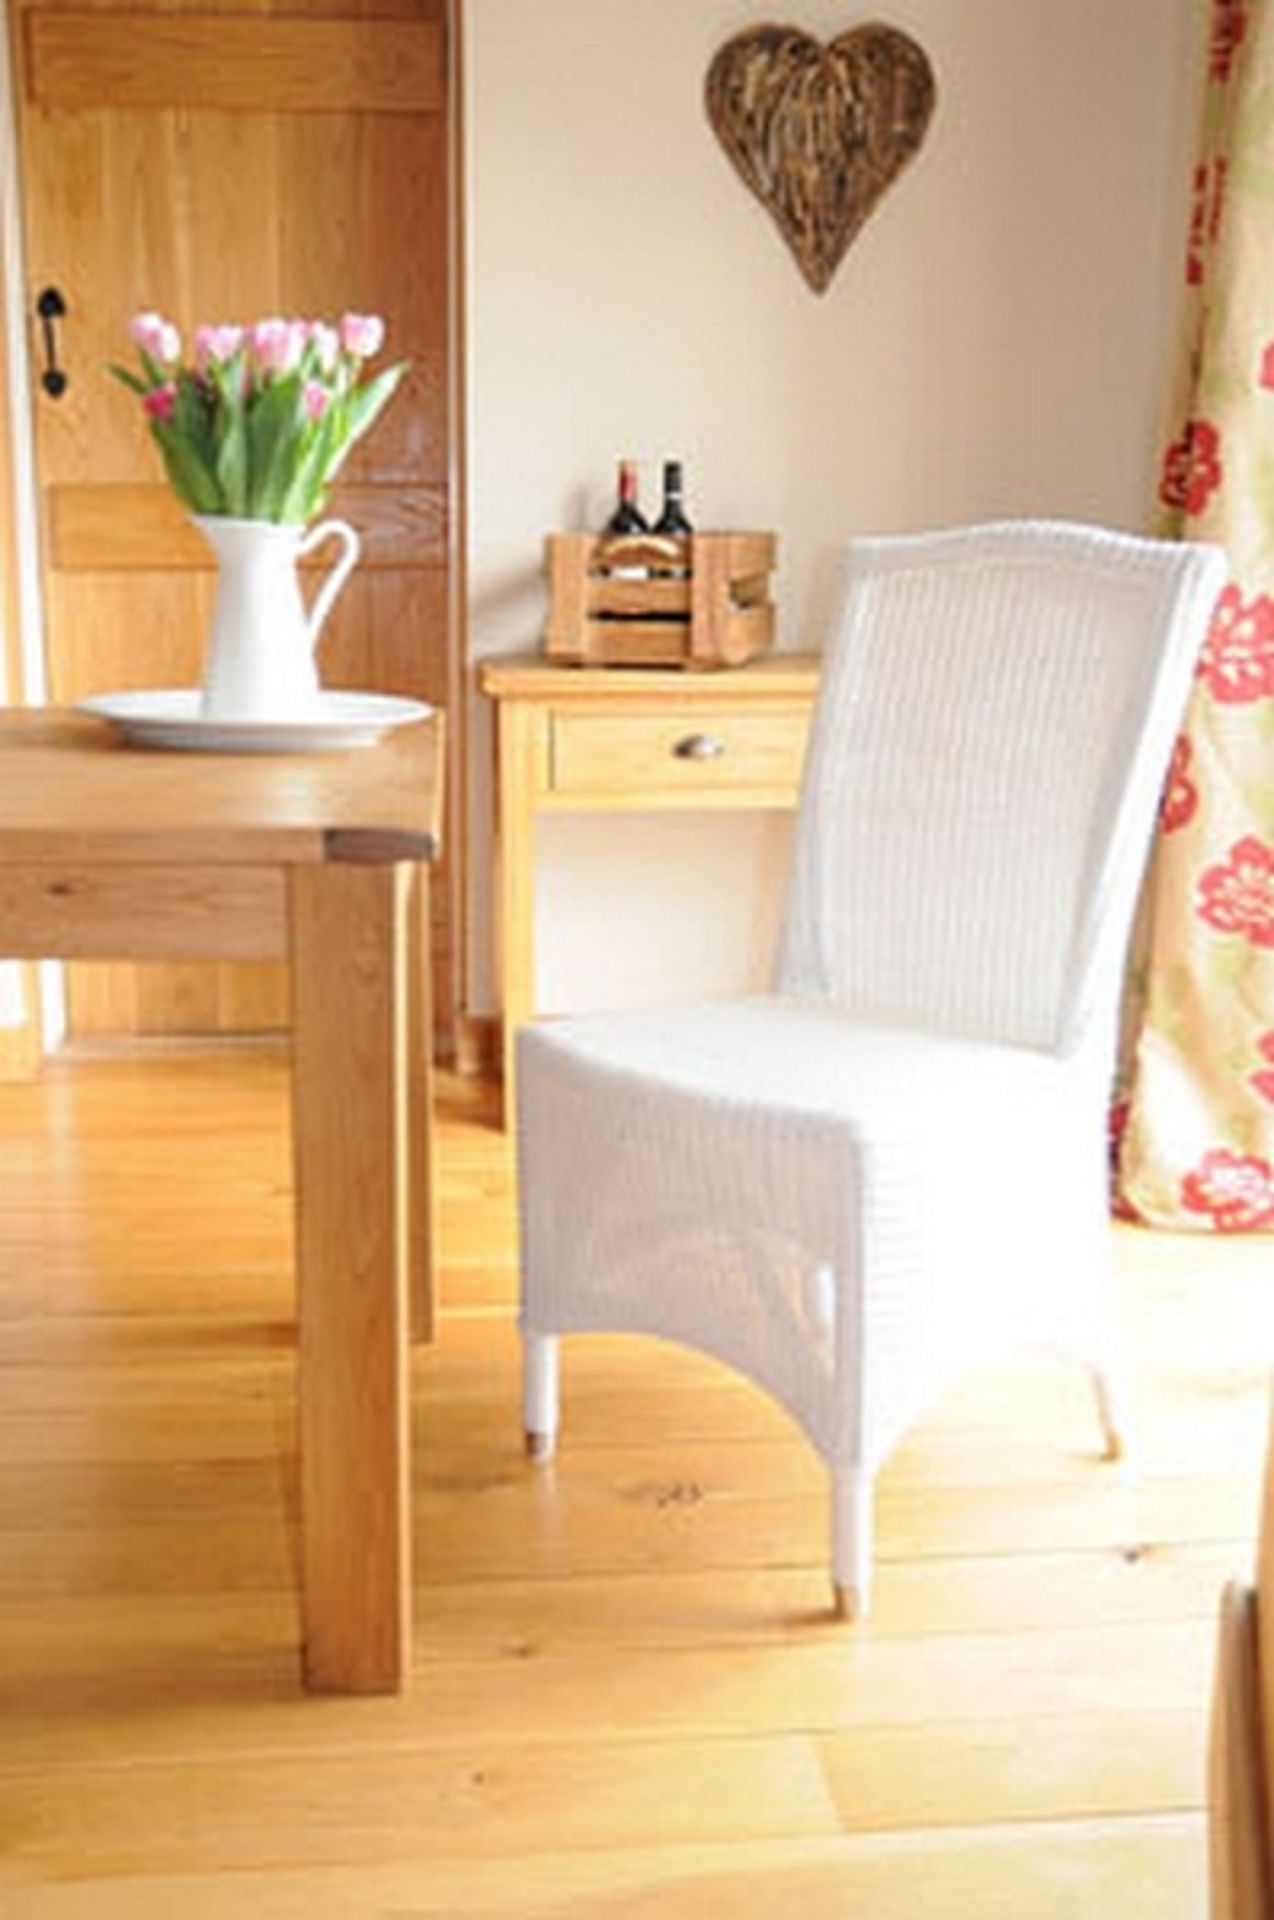 A Pair Of Classic Lloyd Loom Chairs The Pimlico Is At Home In The Dining Room And Comfortable As A - Image 2 of 4